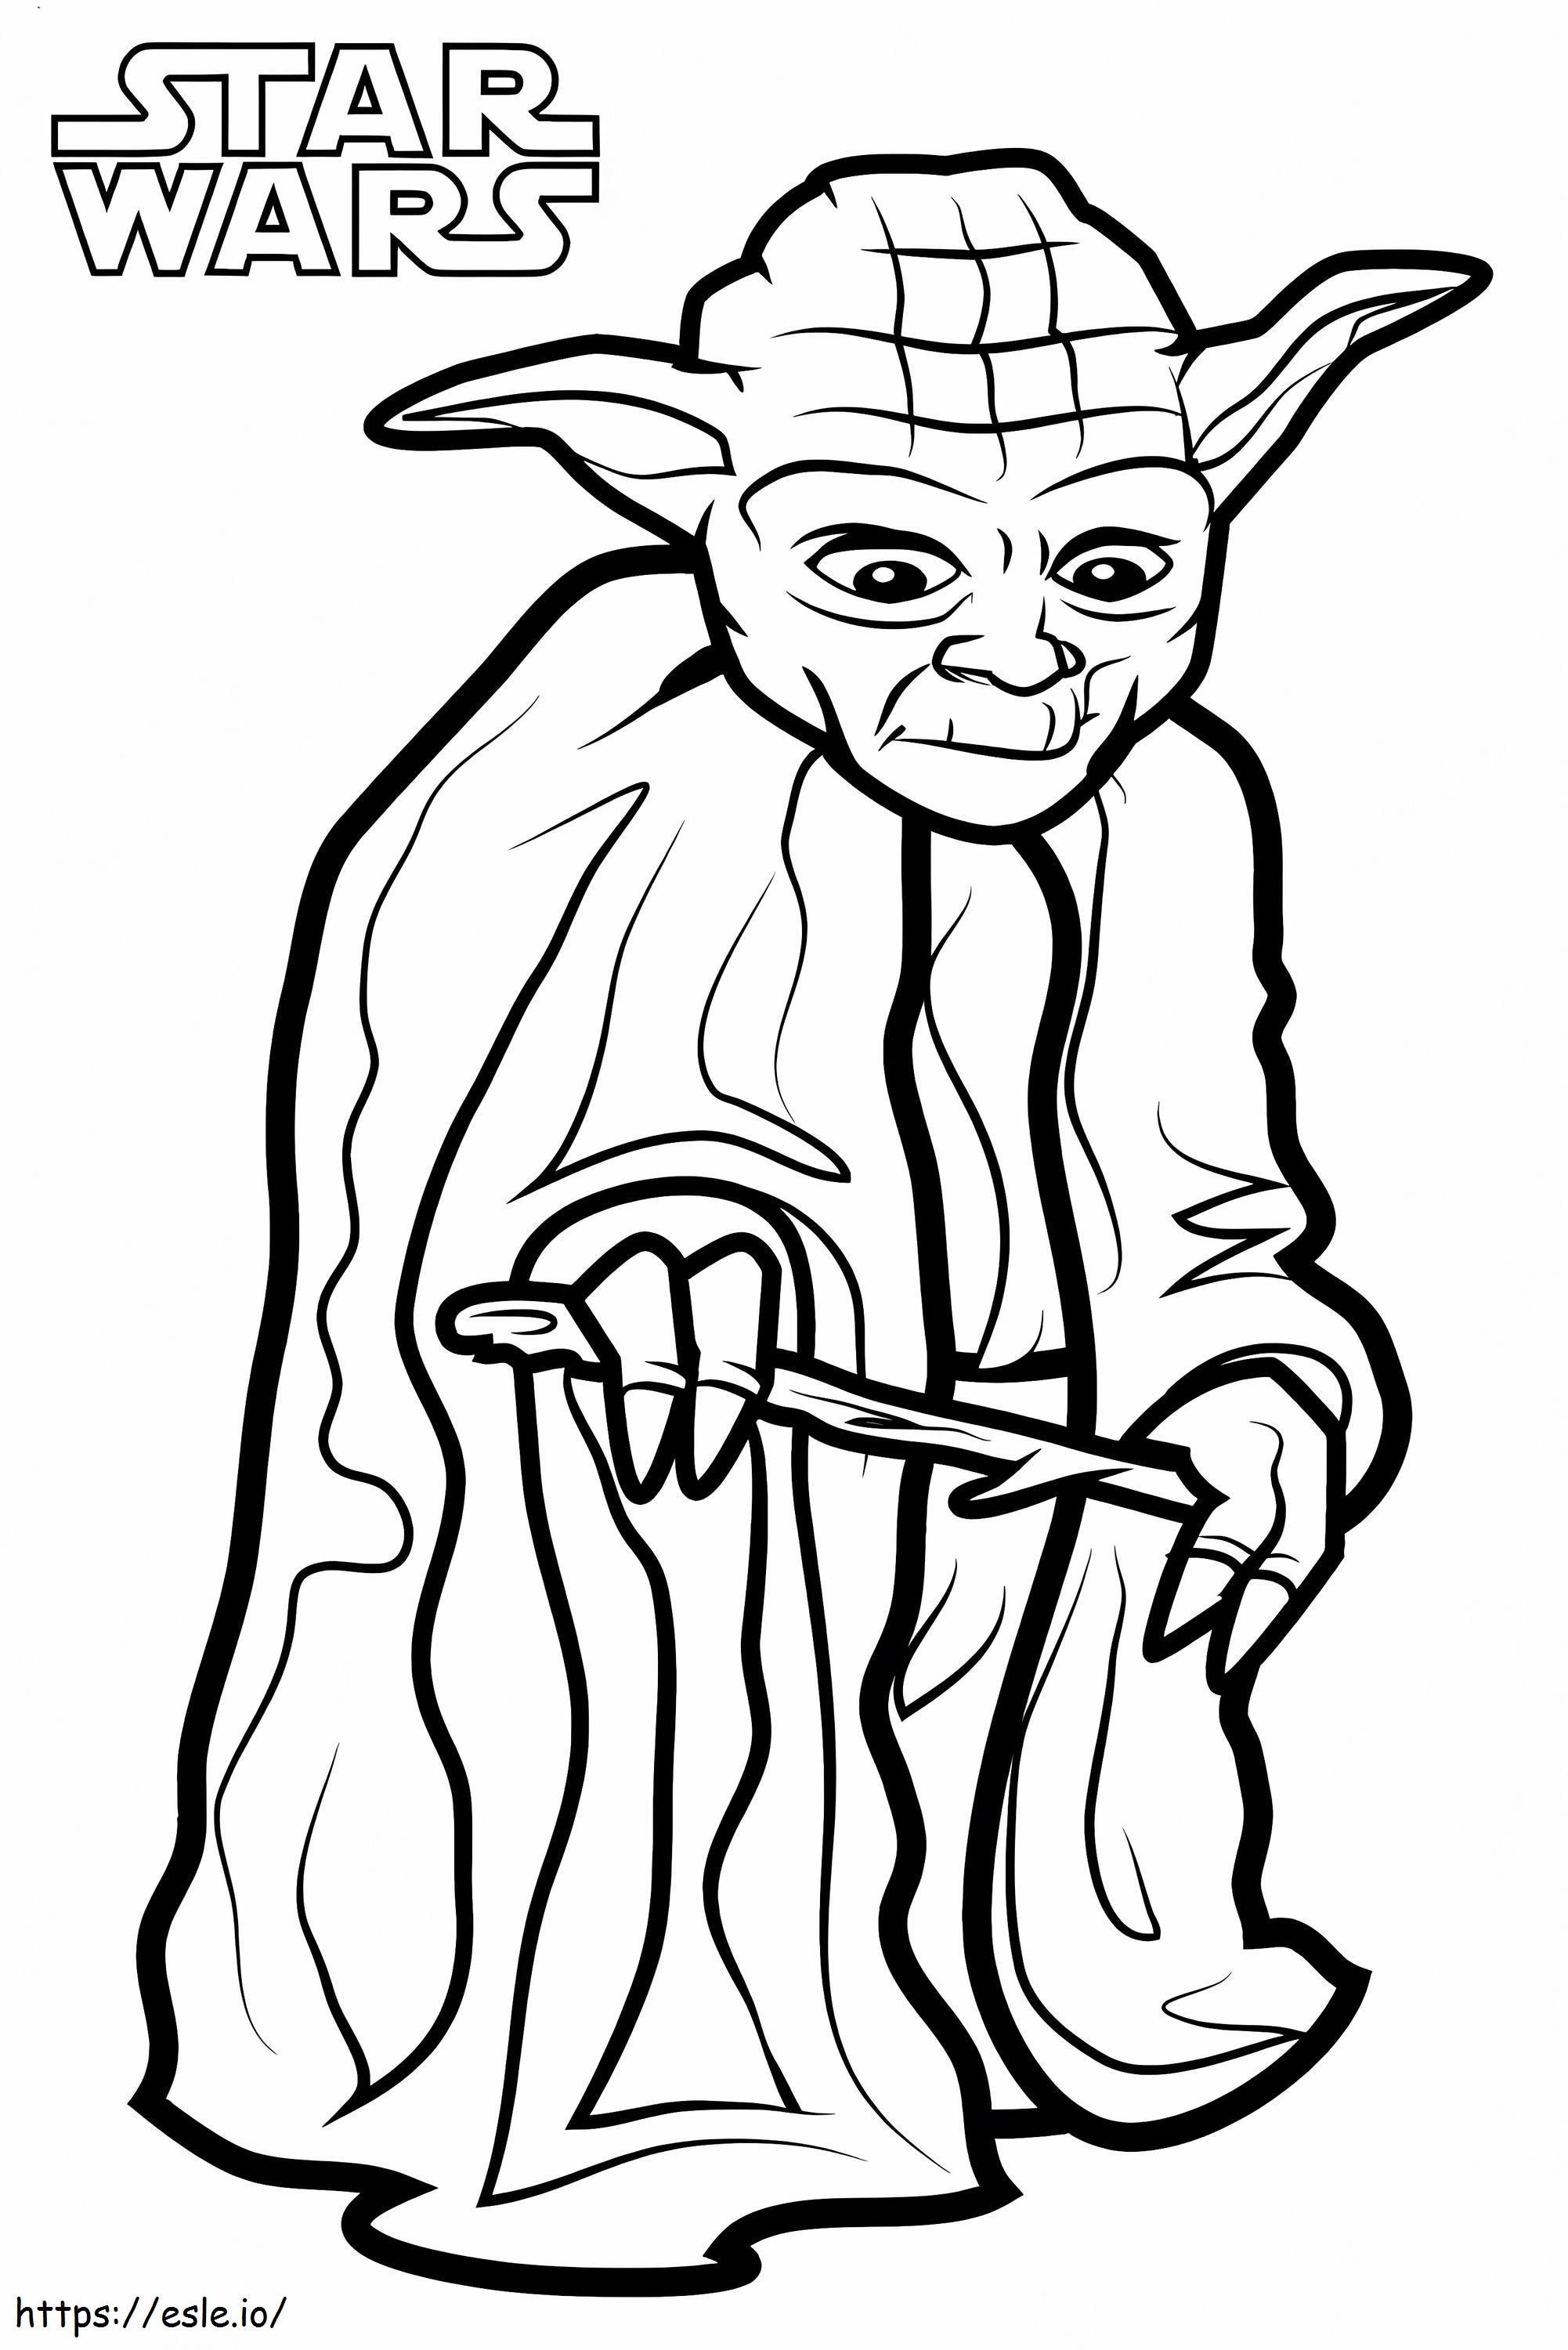 Master Yoda In Star Wars coloring page